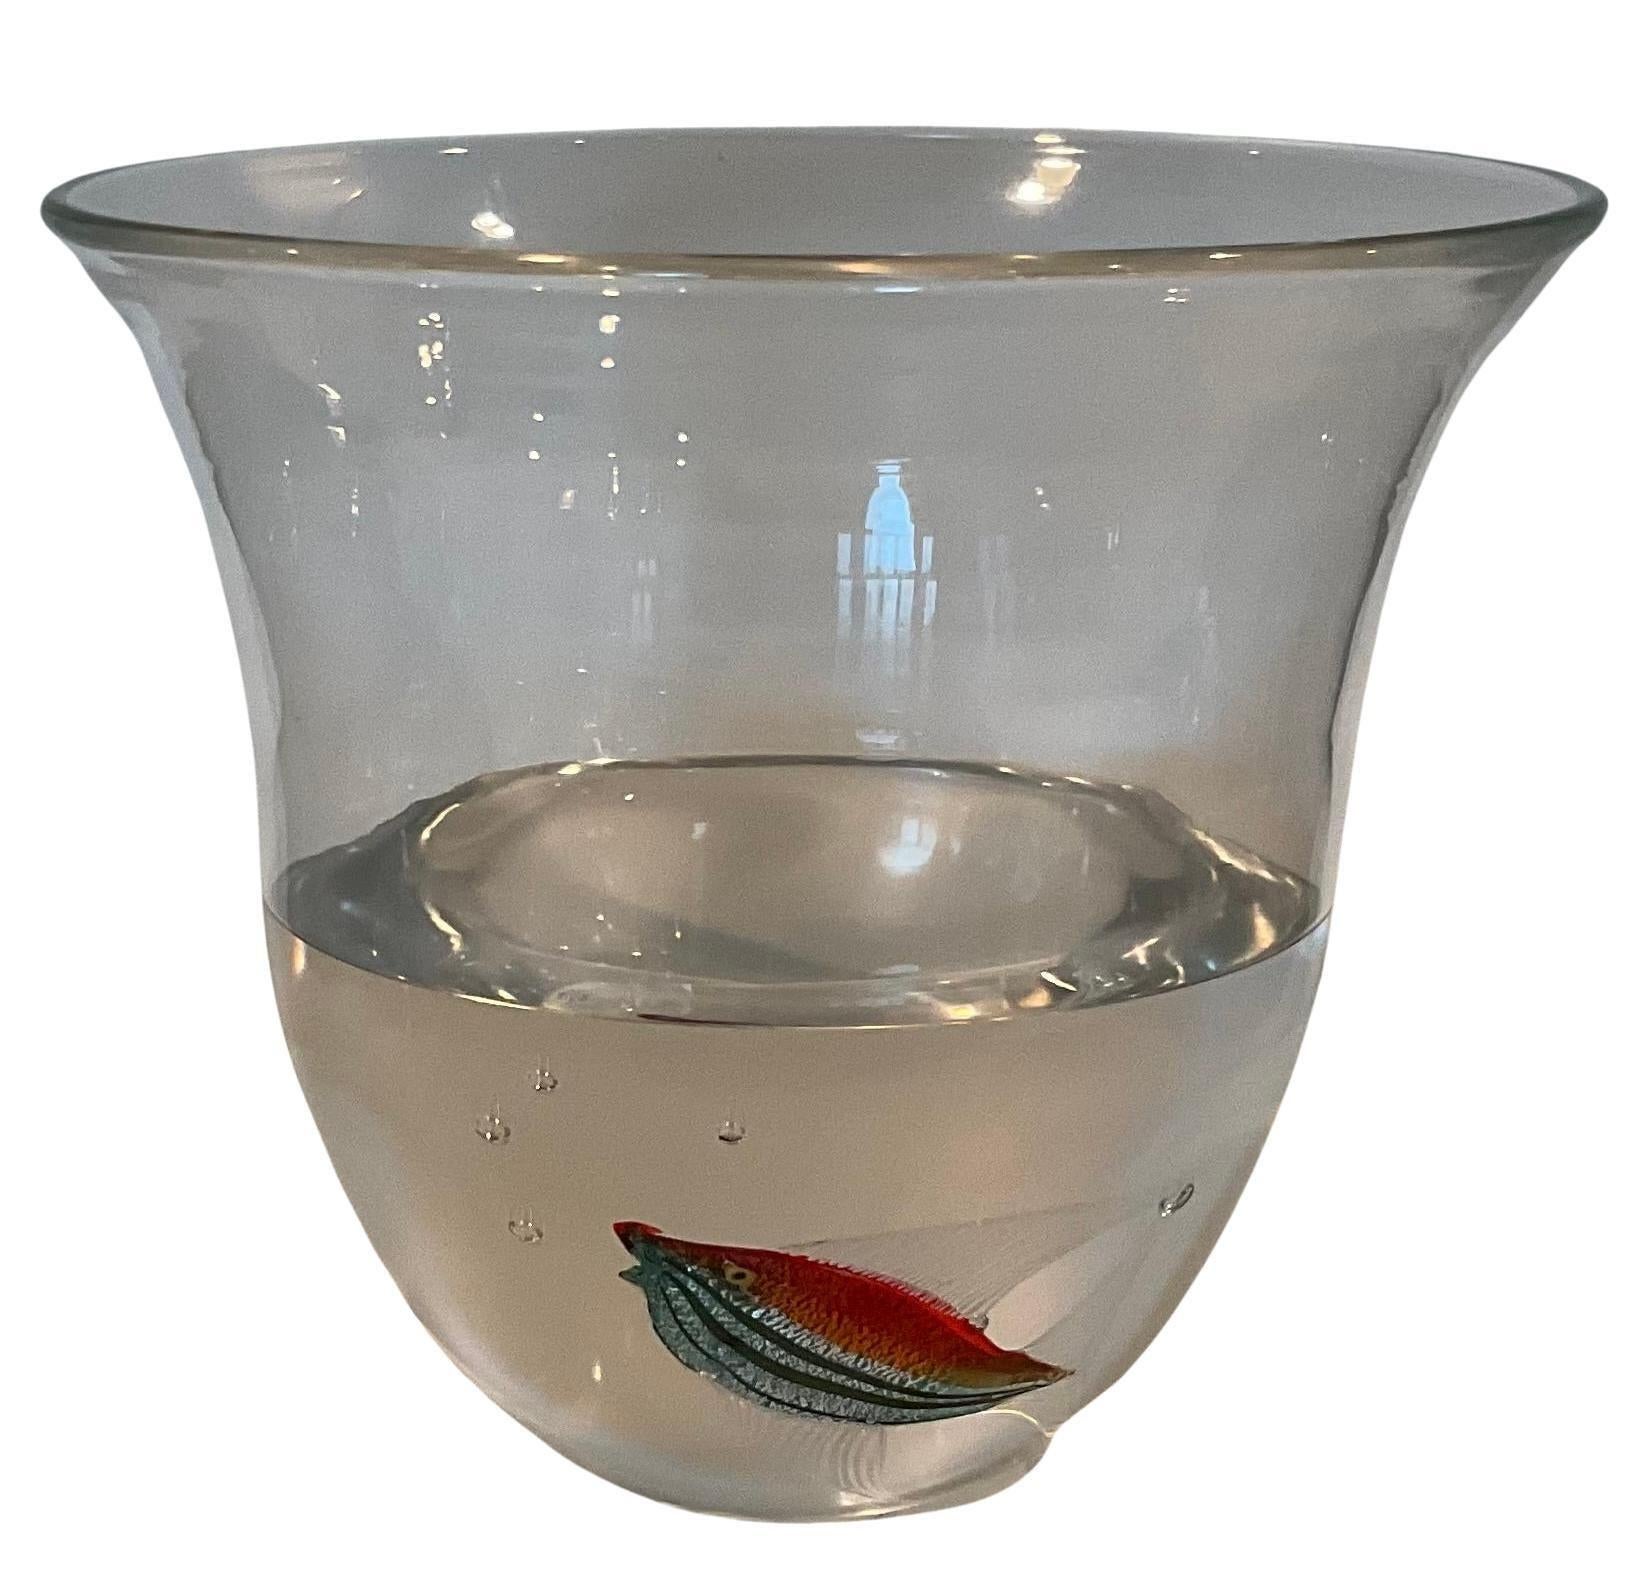 Pino Signoretto Murano Art Glass Aquarium Vase signed by the artist dated 1985. The fish is emerged in the water which is also solid glass. 